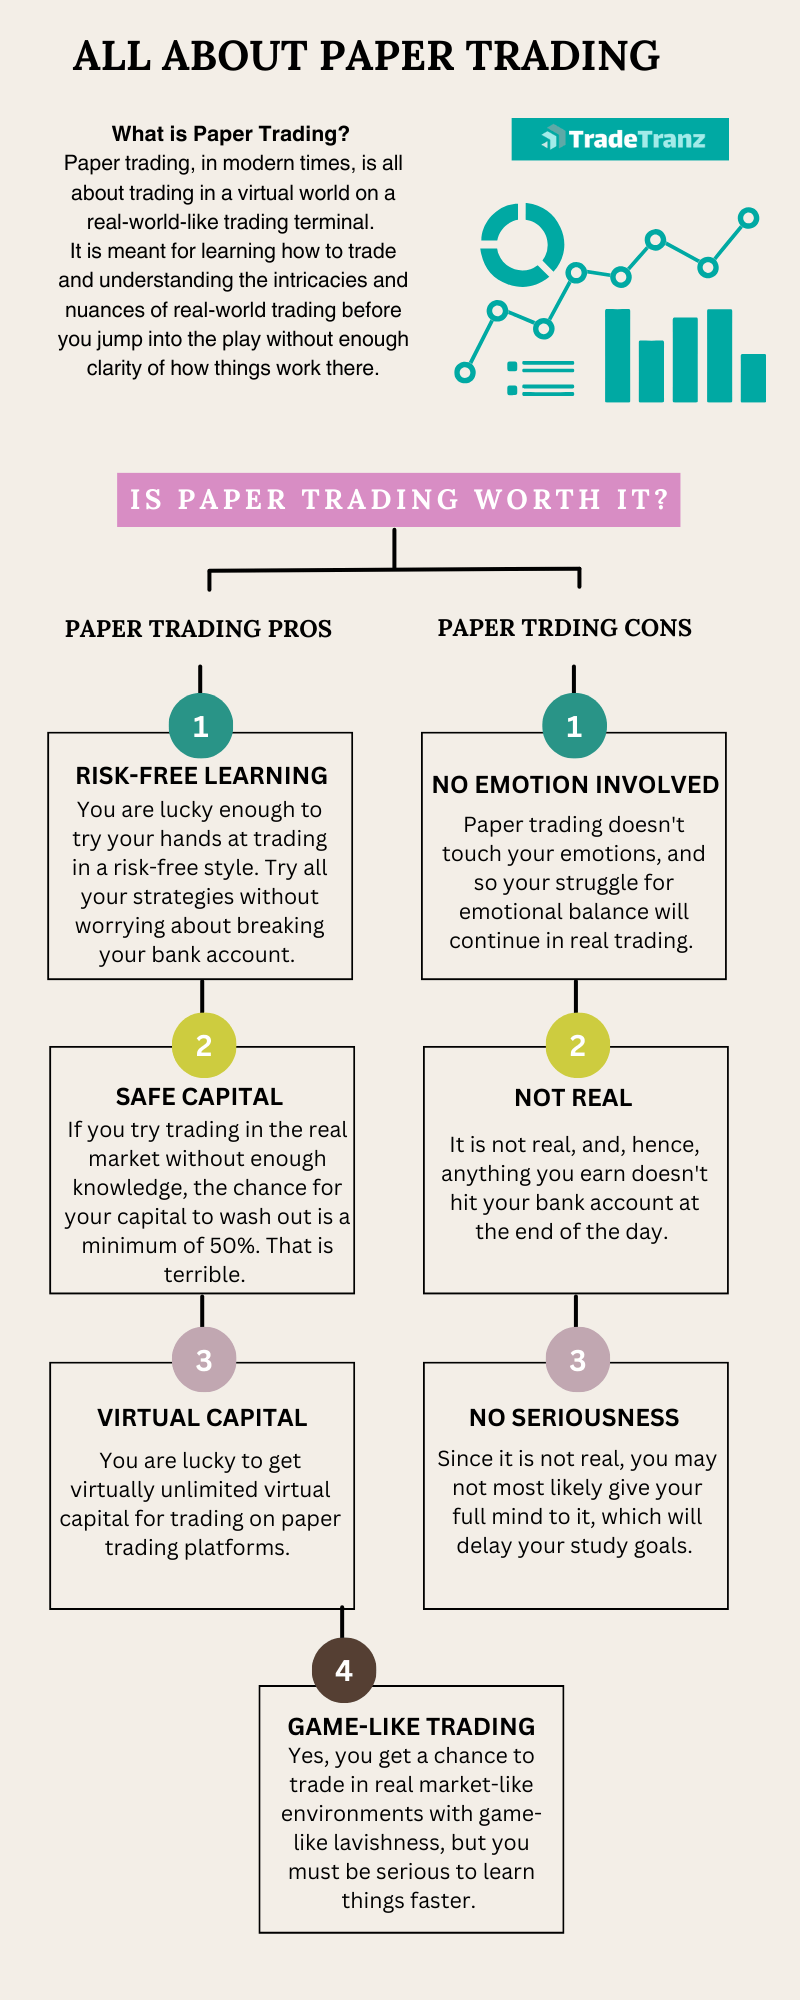 Is Paper Trading Worth It - Infographic